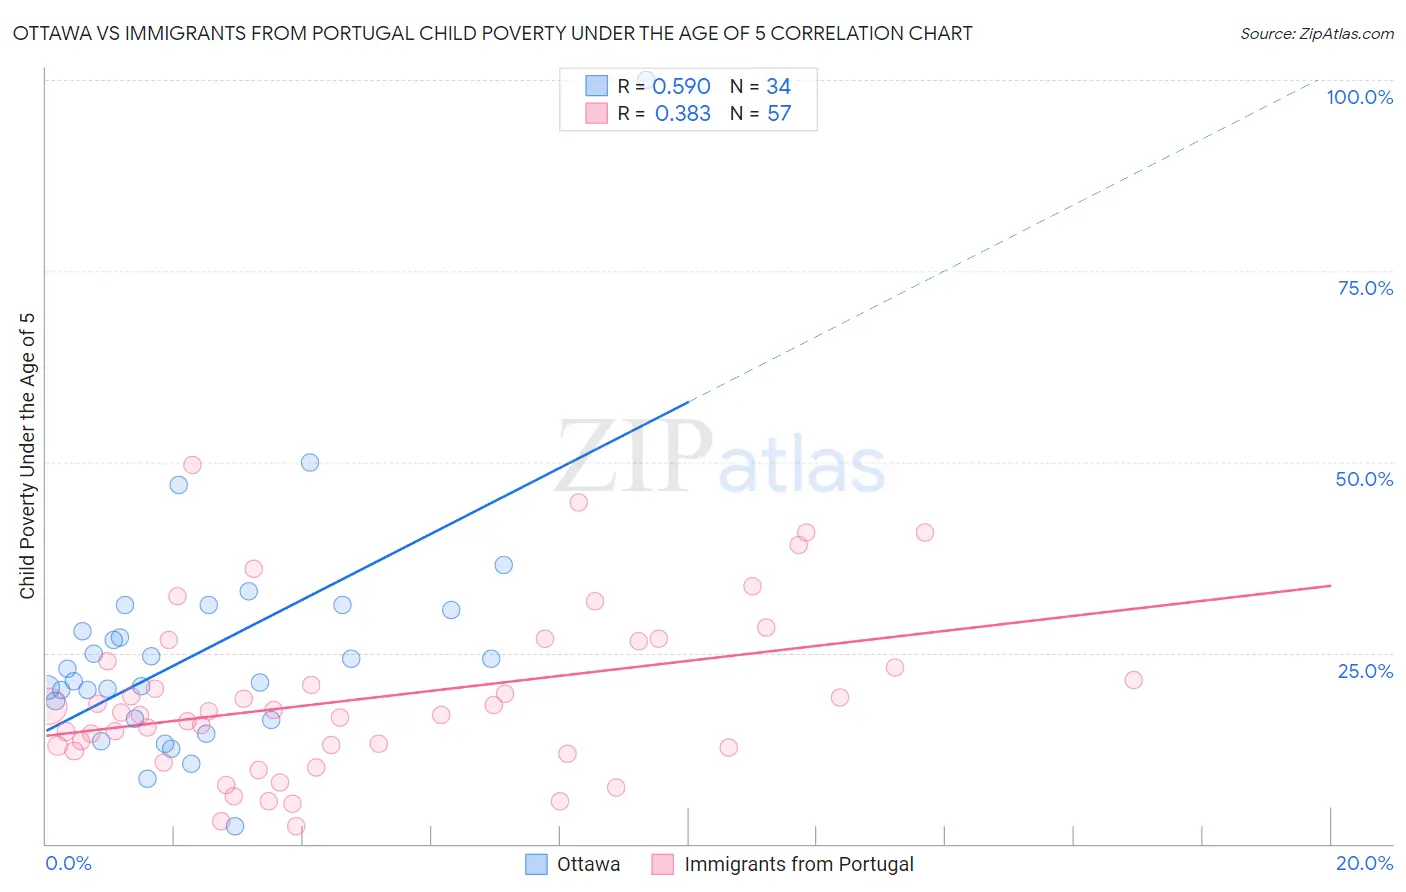 Ottawa vs Immigrants from Portugal Child Poverty Under the Age of 5